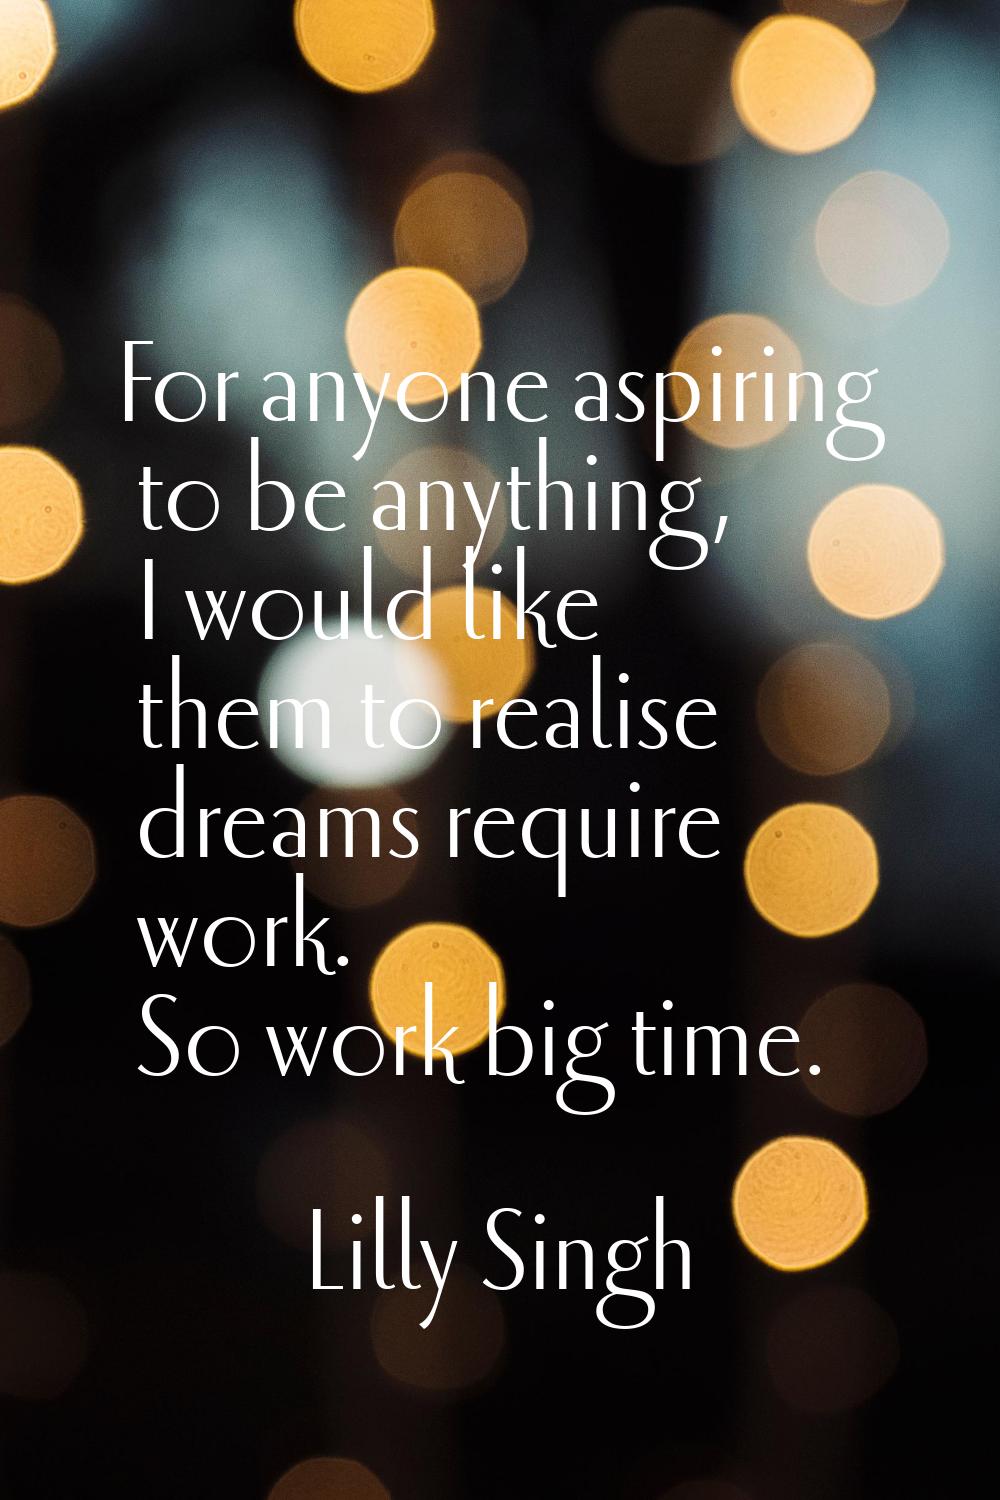 For anyone aspiring to be anything, I would like them to realise dreams require work. So work big t